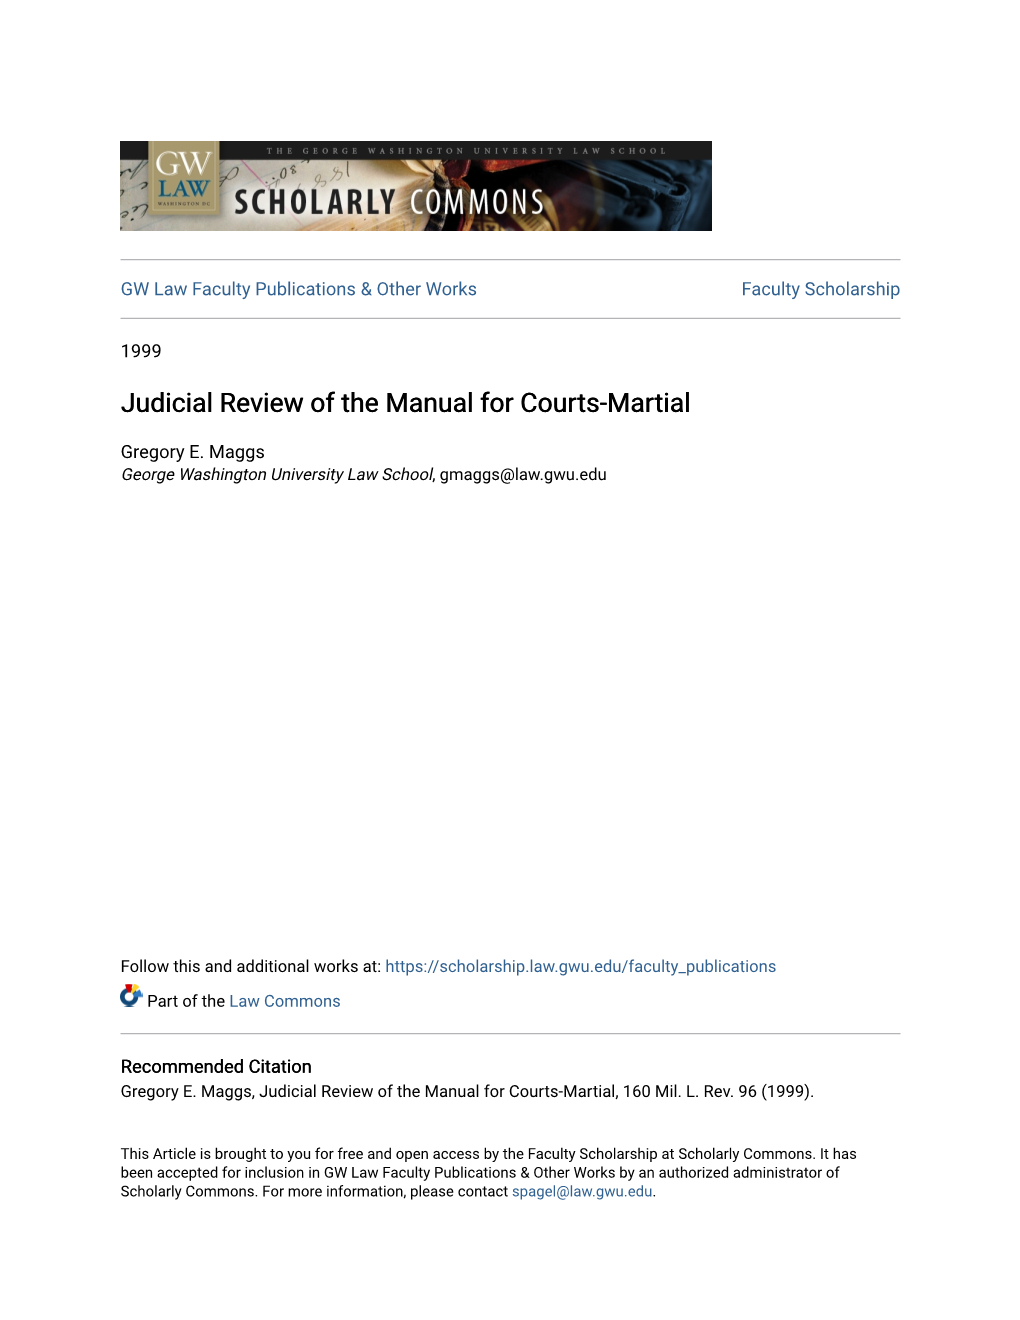 Judicial Review of the Manual for Courts-Martial